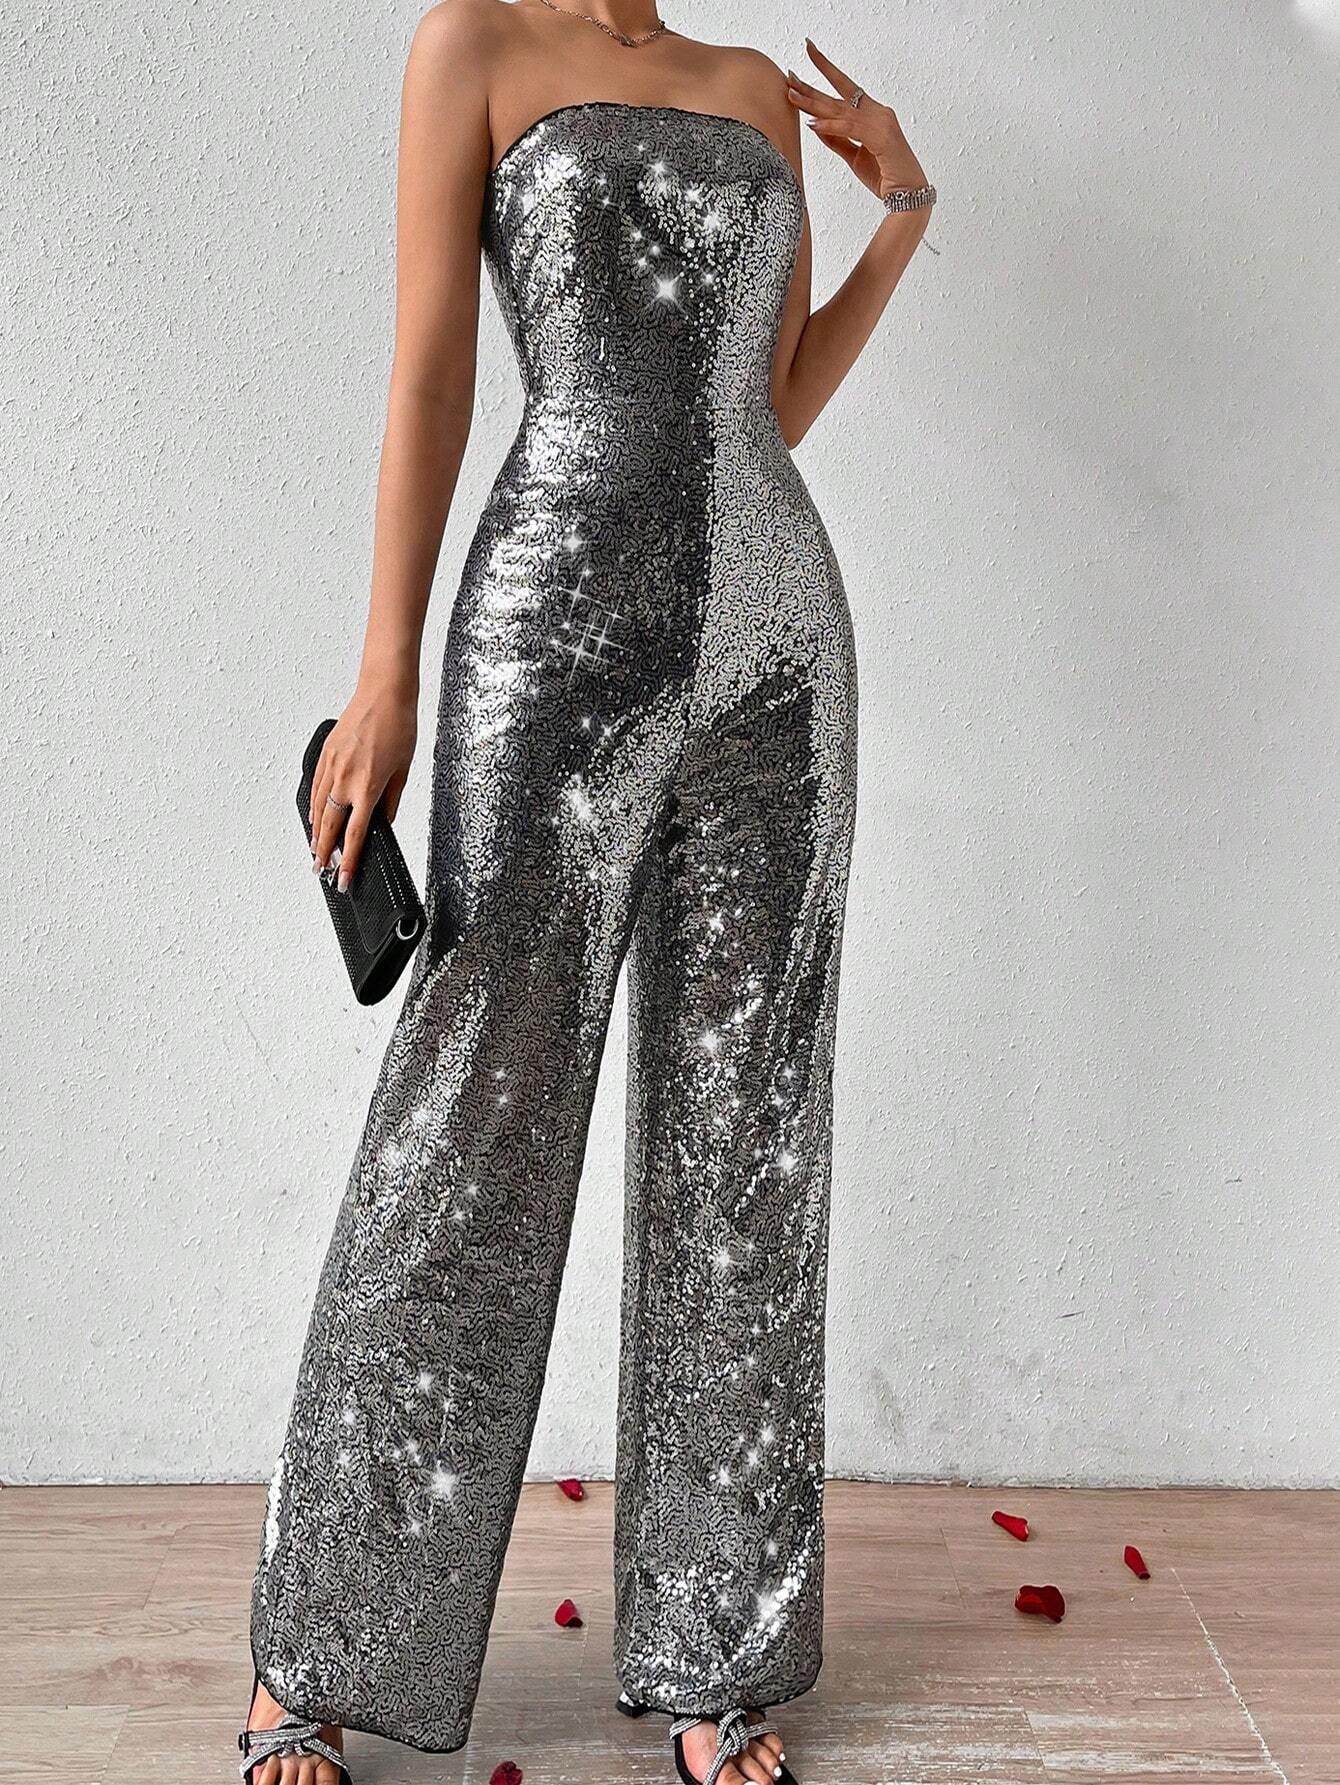 SHEIN Privé Women'S Sequined Tube Top Jumpsuit | SHEIN